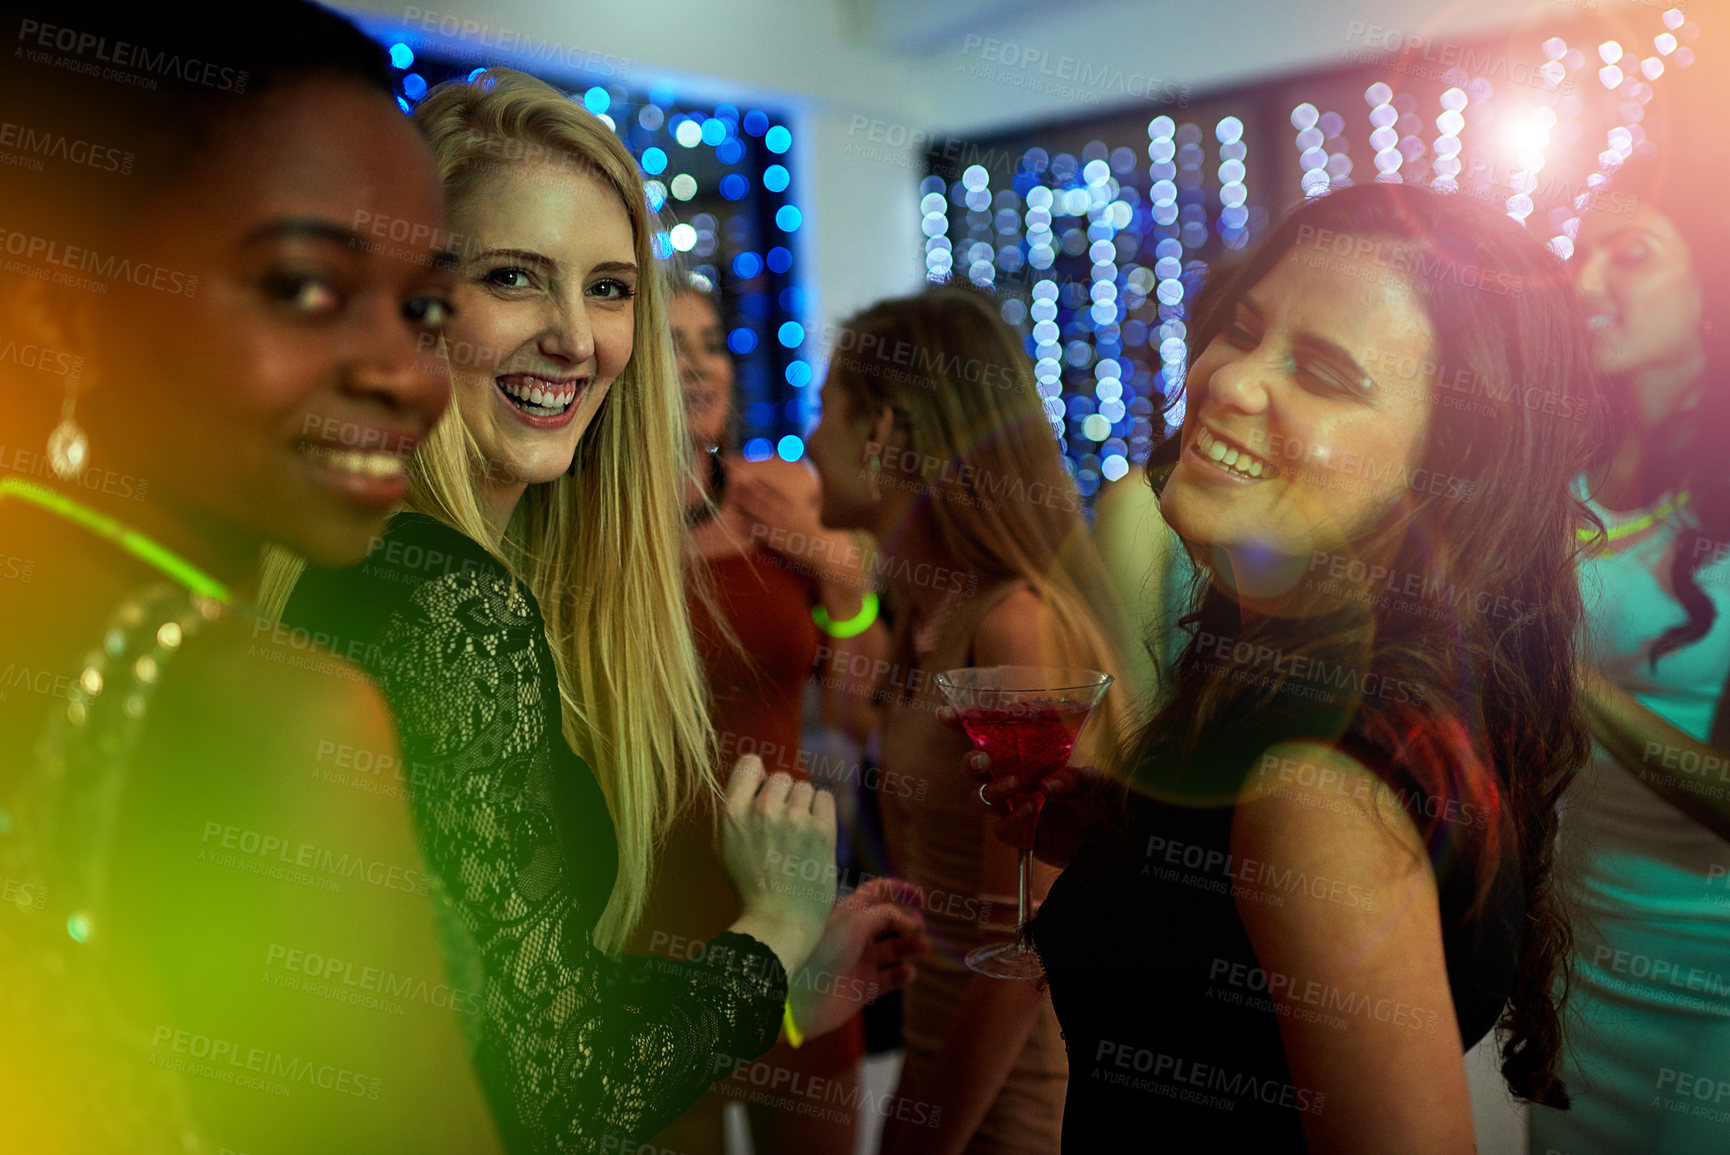 Buy stock photo Shot of a group of young people enjoying themselves at a nightclub